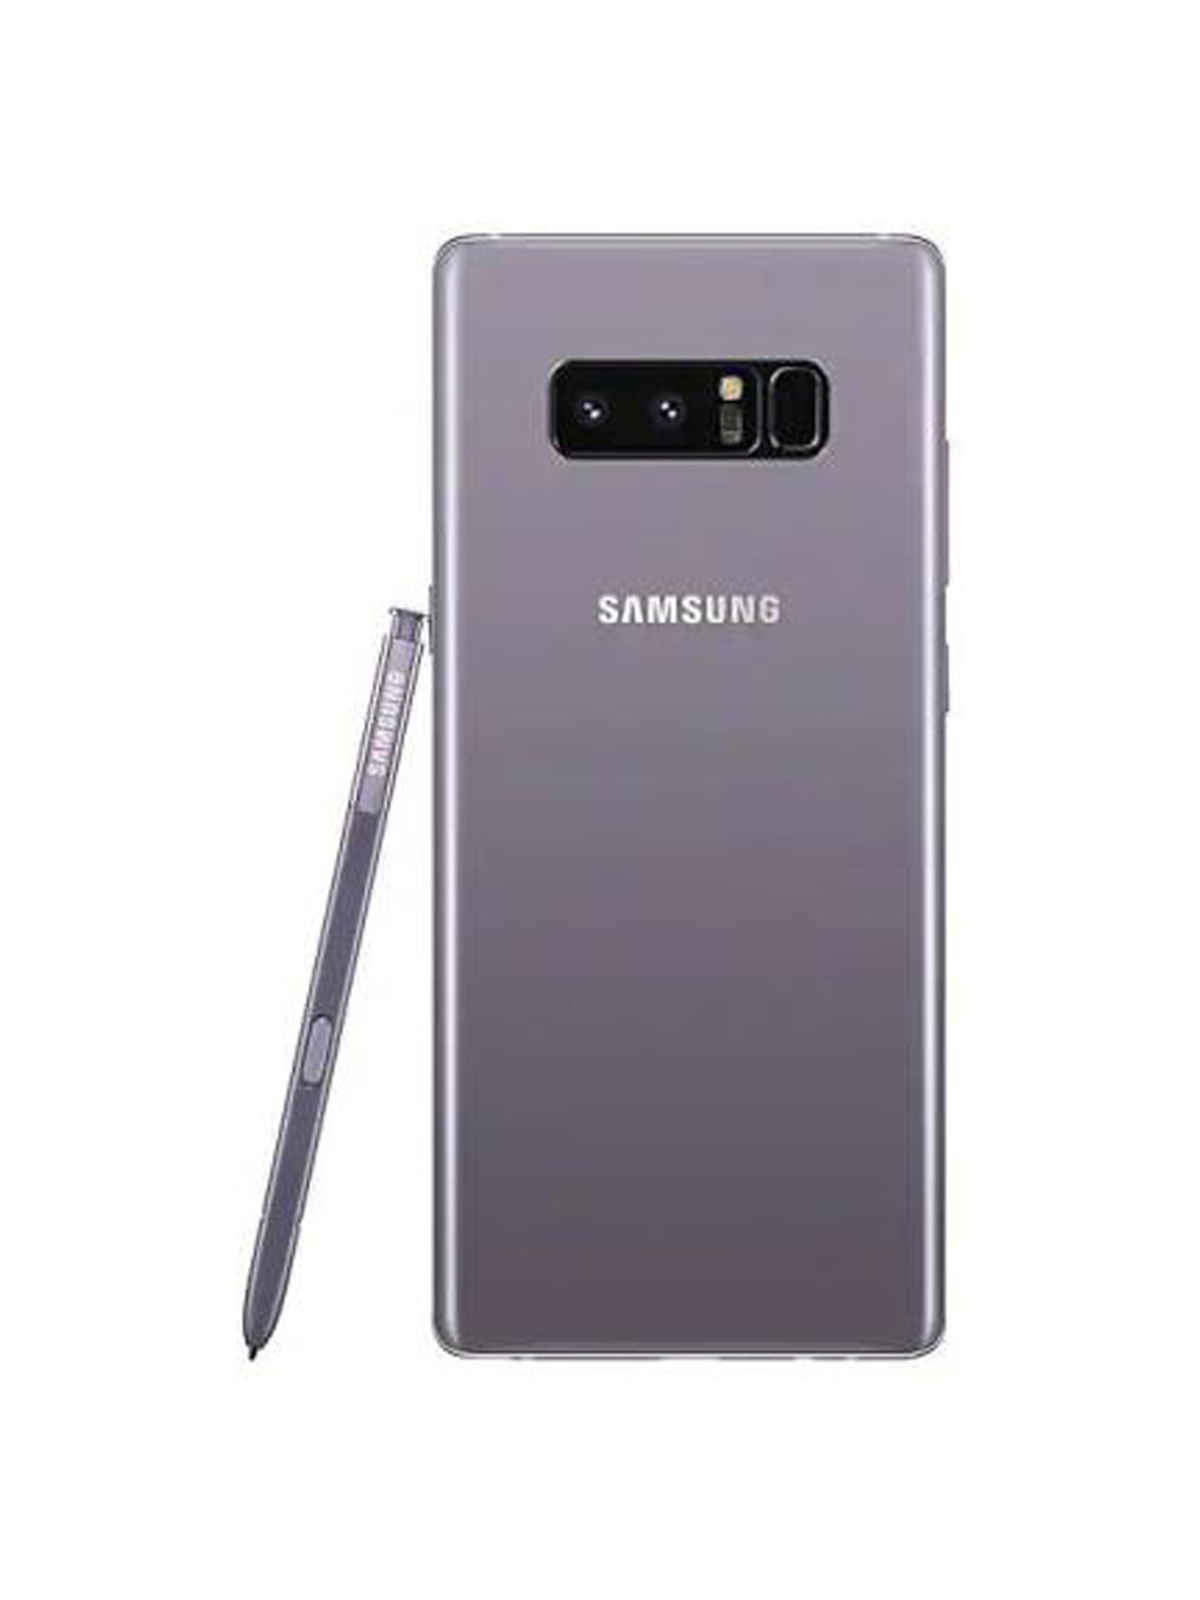 Samsung Galaxy Note 8 128GB Price in India, Full Specifications  Features  - 24th November 2022 | Digit